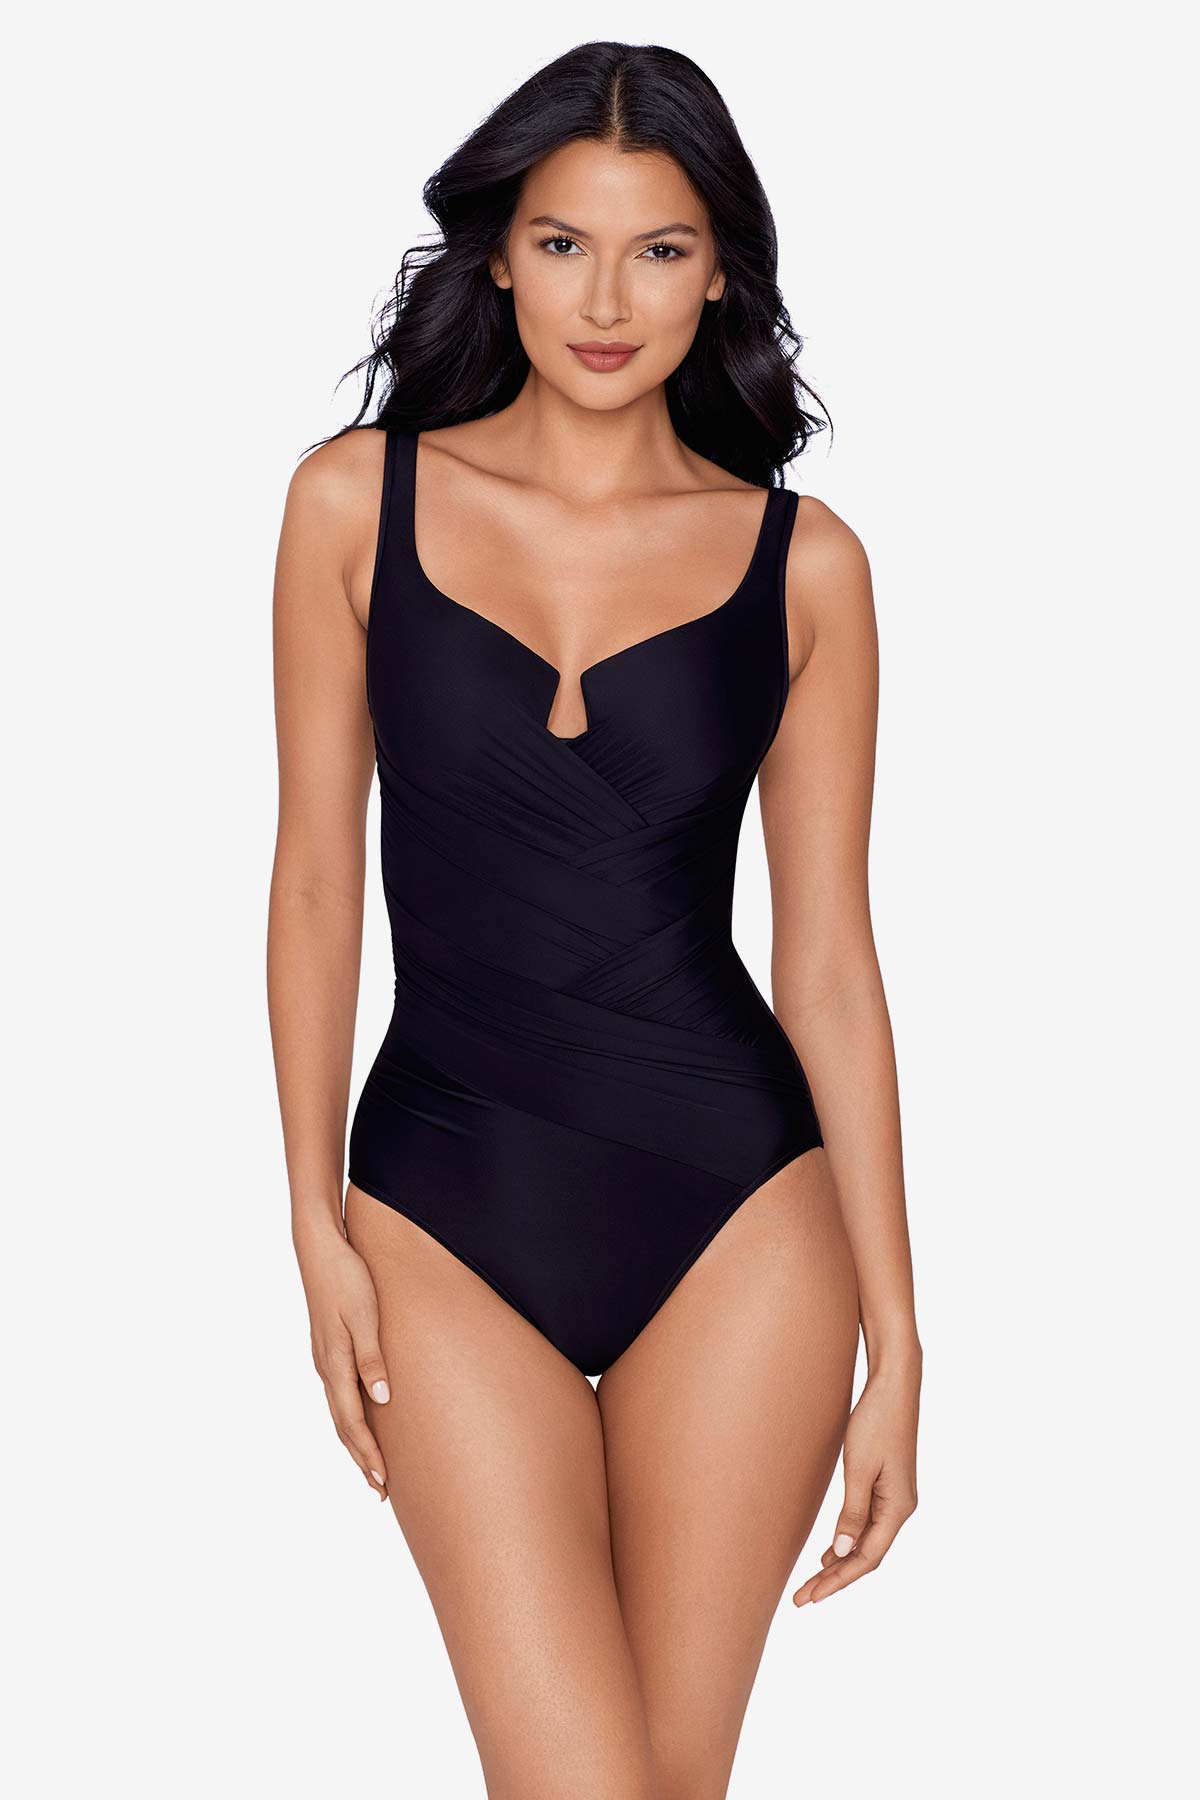 Lucky Brand Costa Azul One Piece Swimsuit at